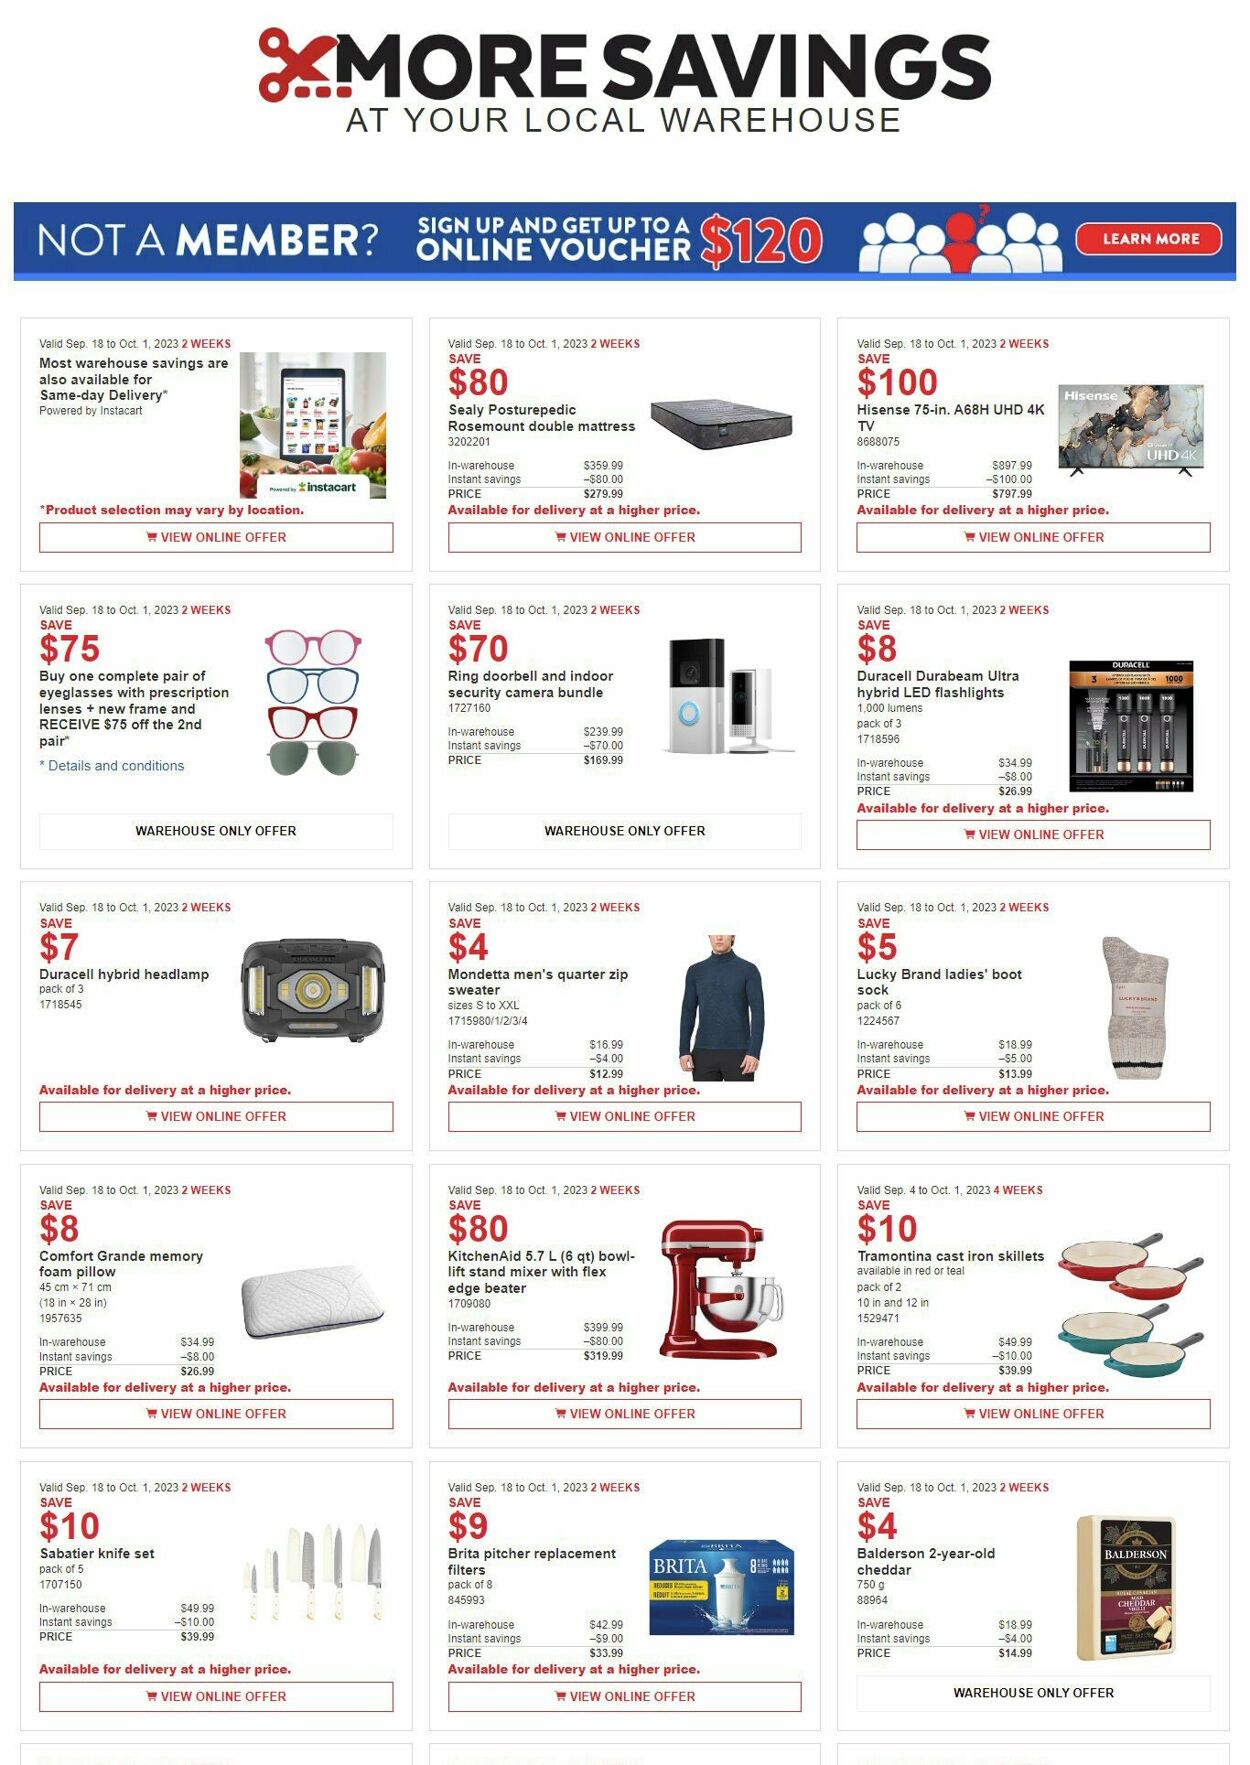 Circulaire Costco - Costco (ON & Atlantic Canada) Weekly Savings September 18 to October 1 18 sept. 2023 - 1 oct. 2023